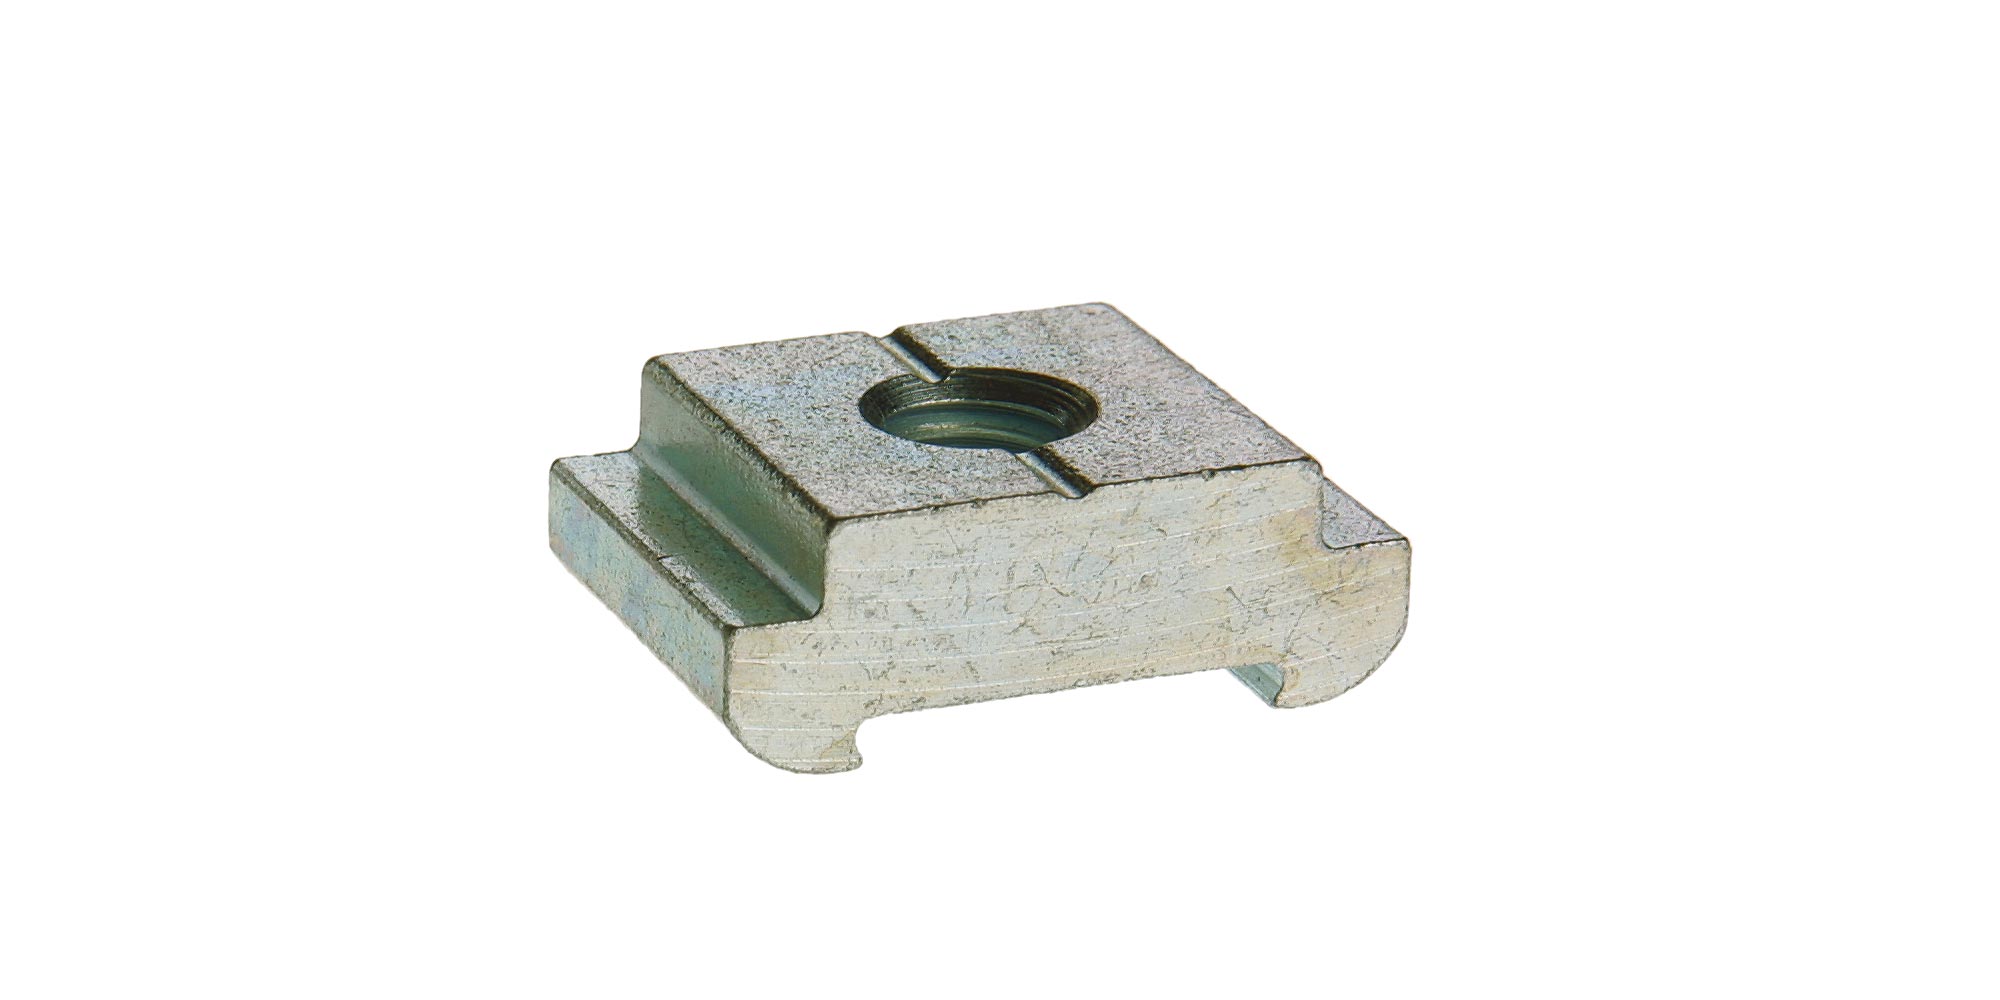 Sliding blocks C30 M10 galvanized steel, without screw, without spring